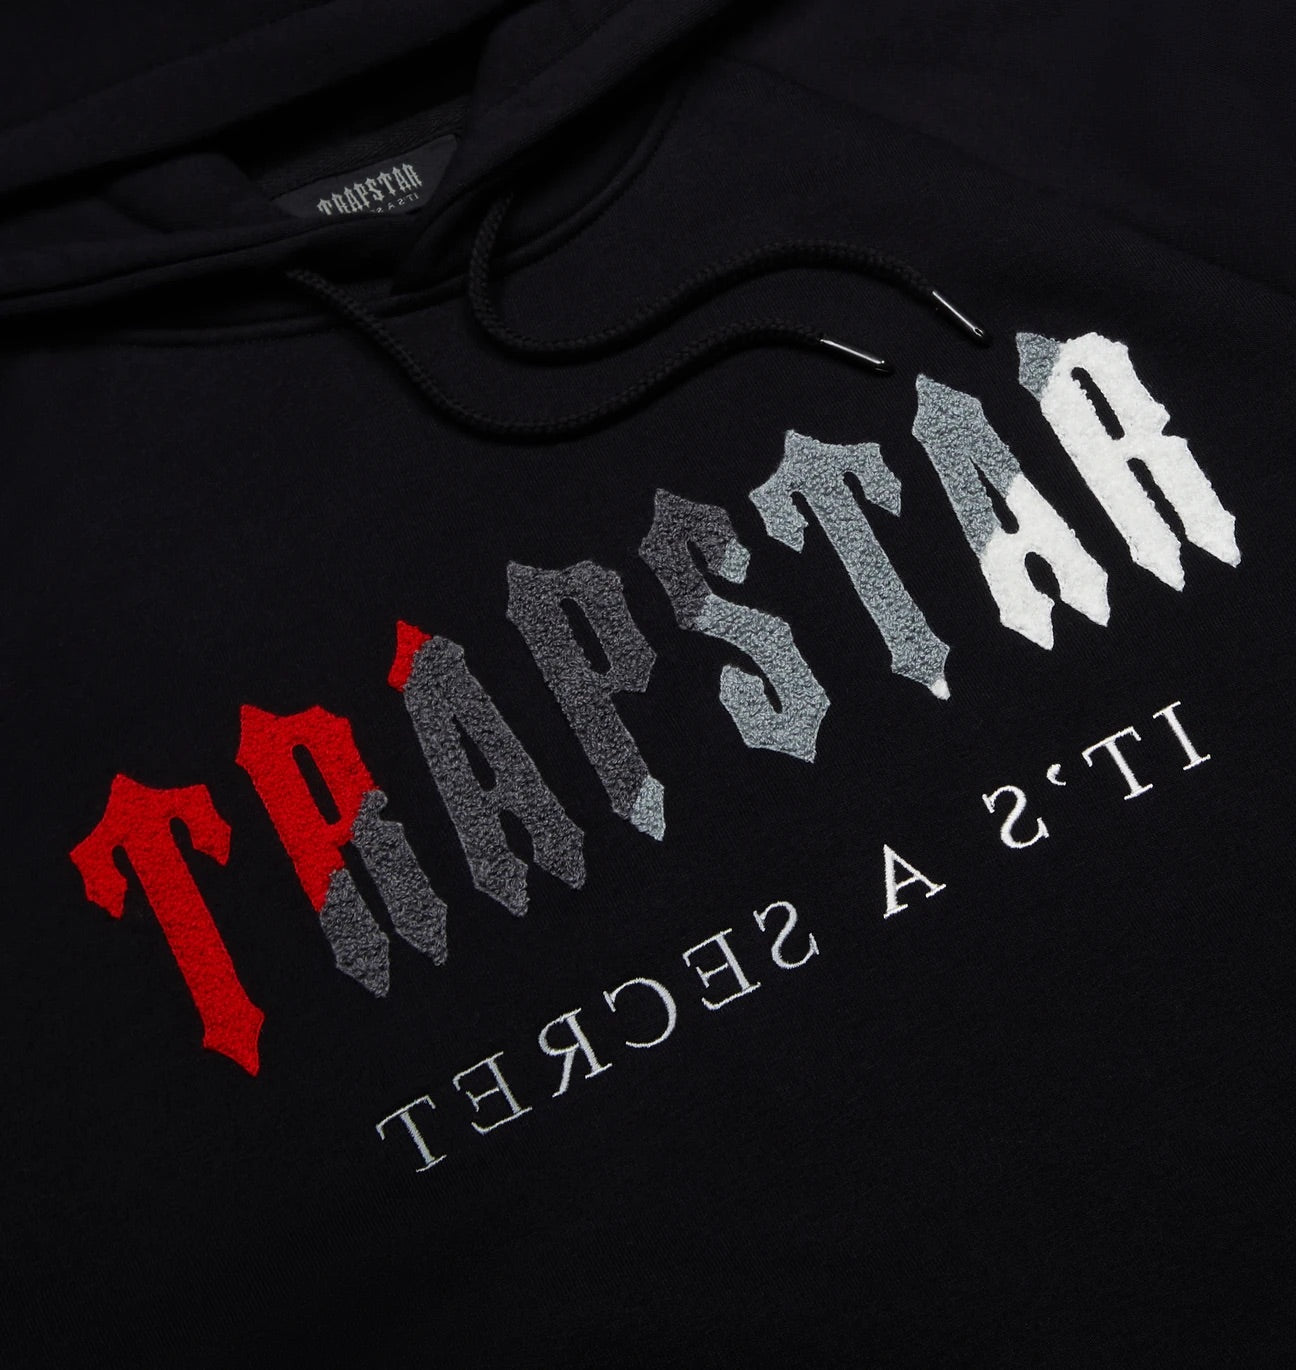 TRAPSTAR CHENILLE DECODED HOODED TRACKSUIT ‘BLACK & RED’